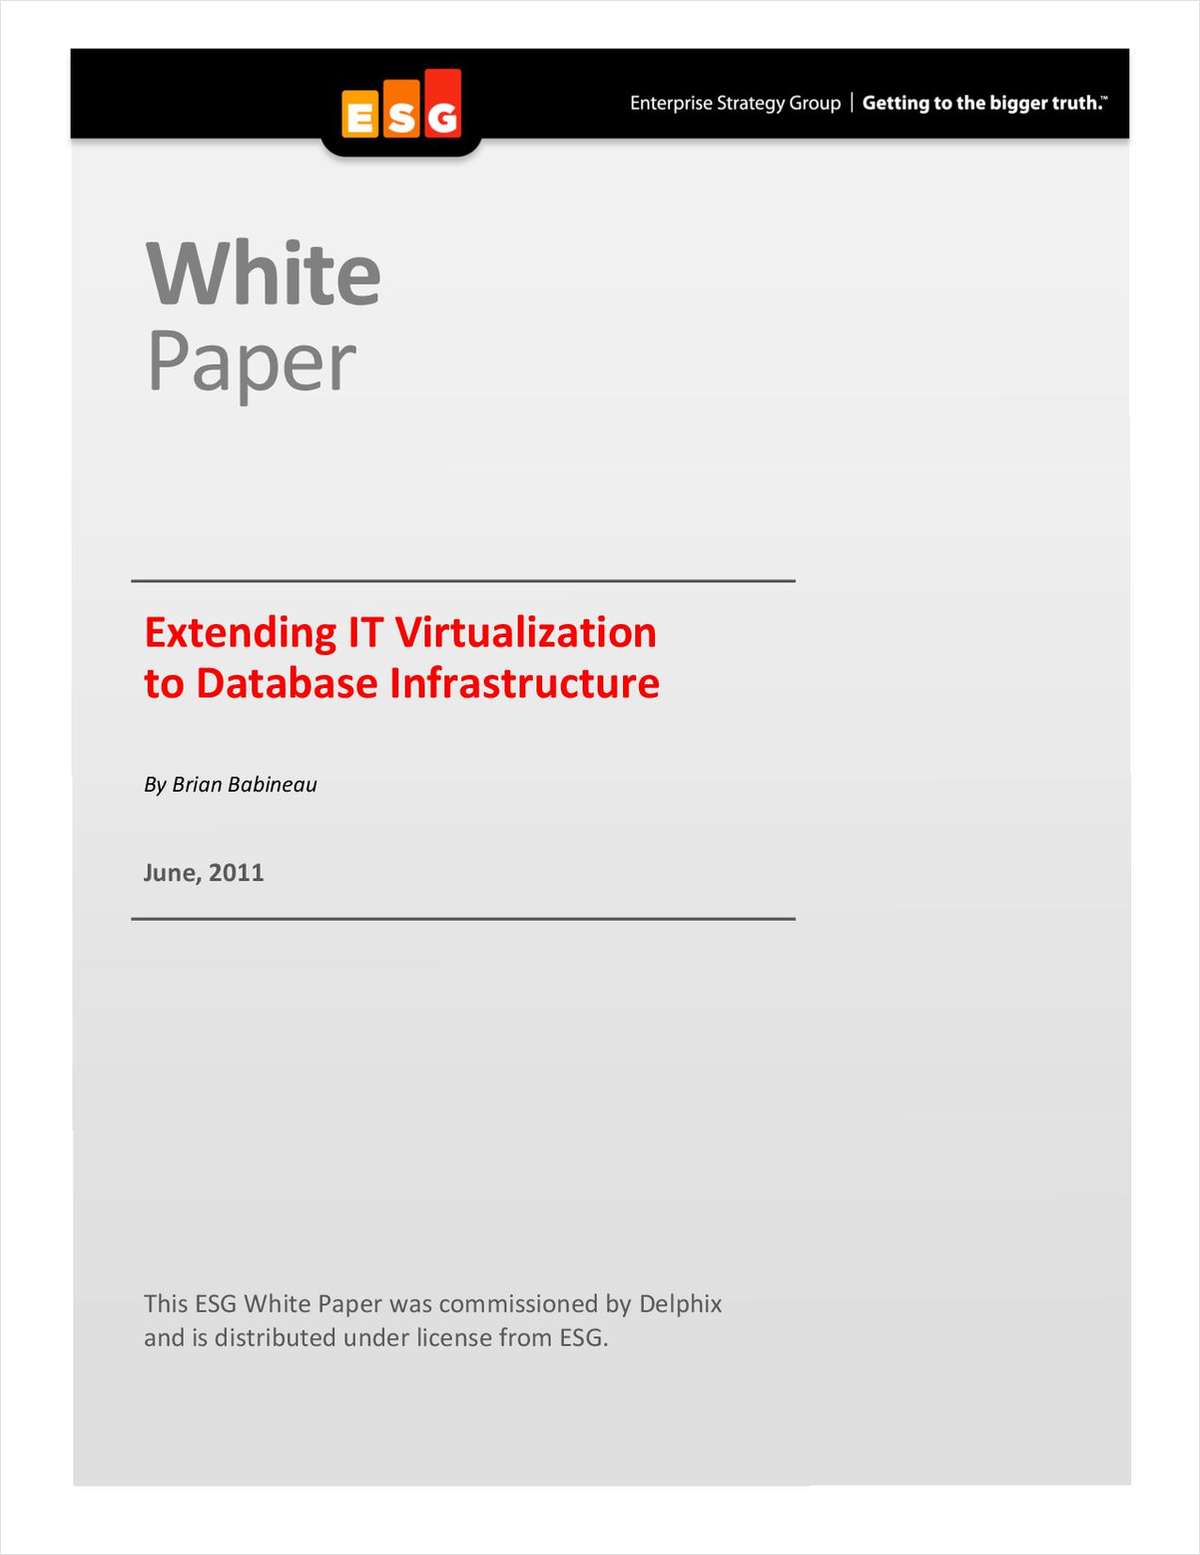 Extending IT Virtualization to Oracle Database Infrastructure